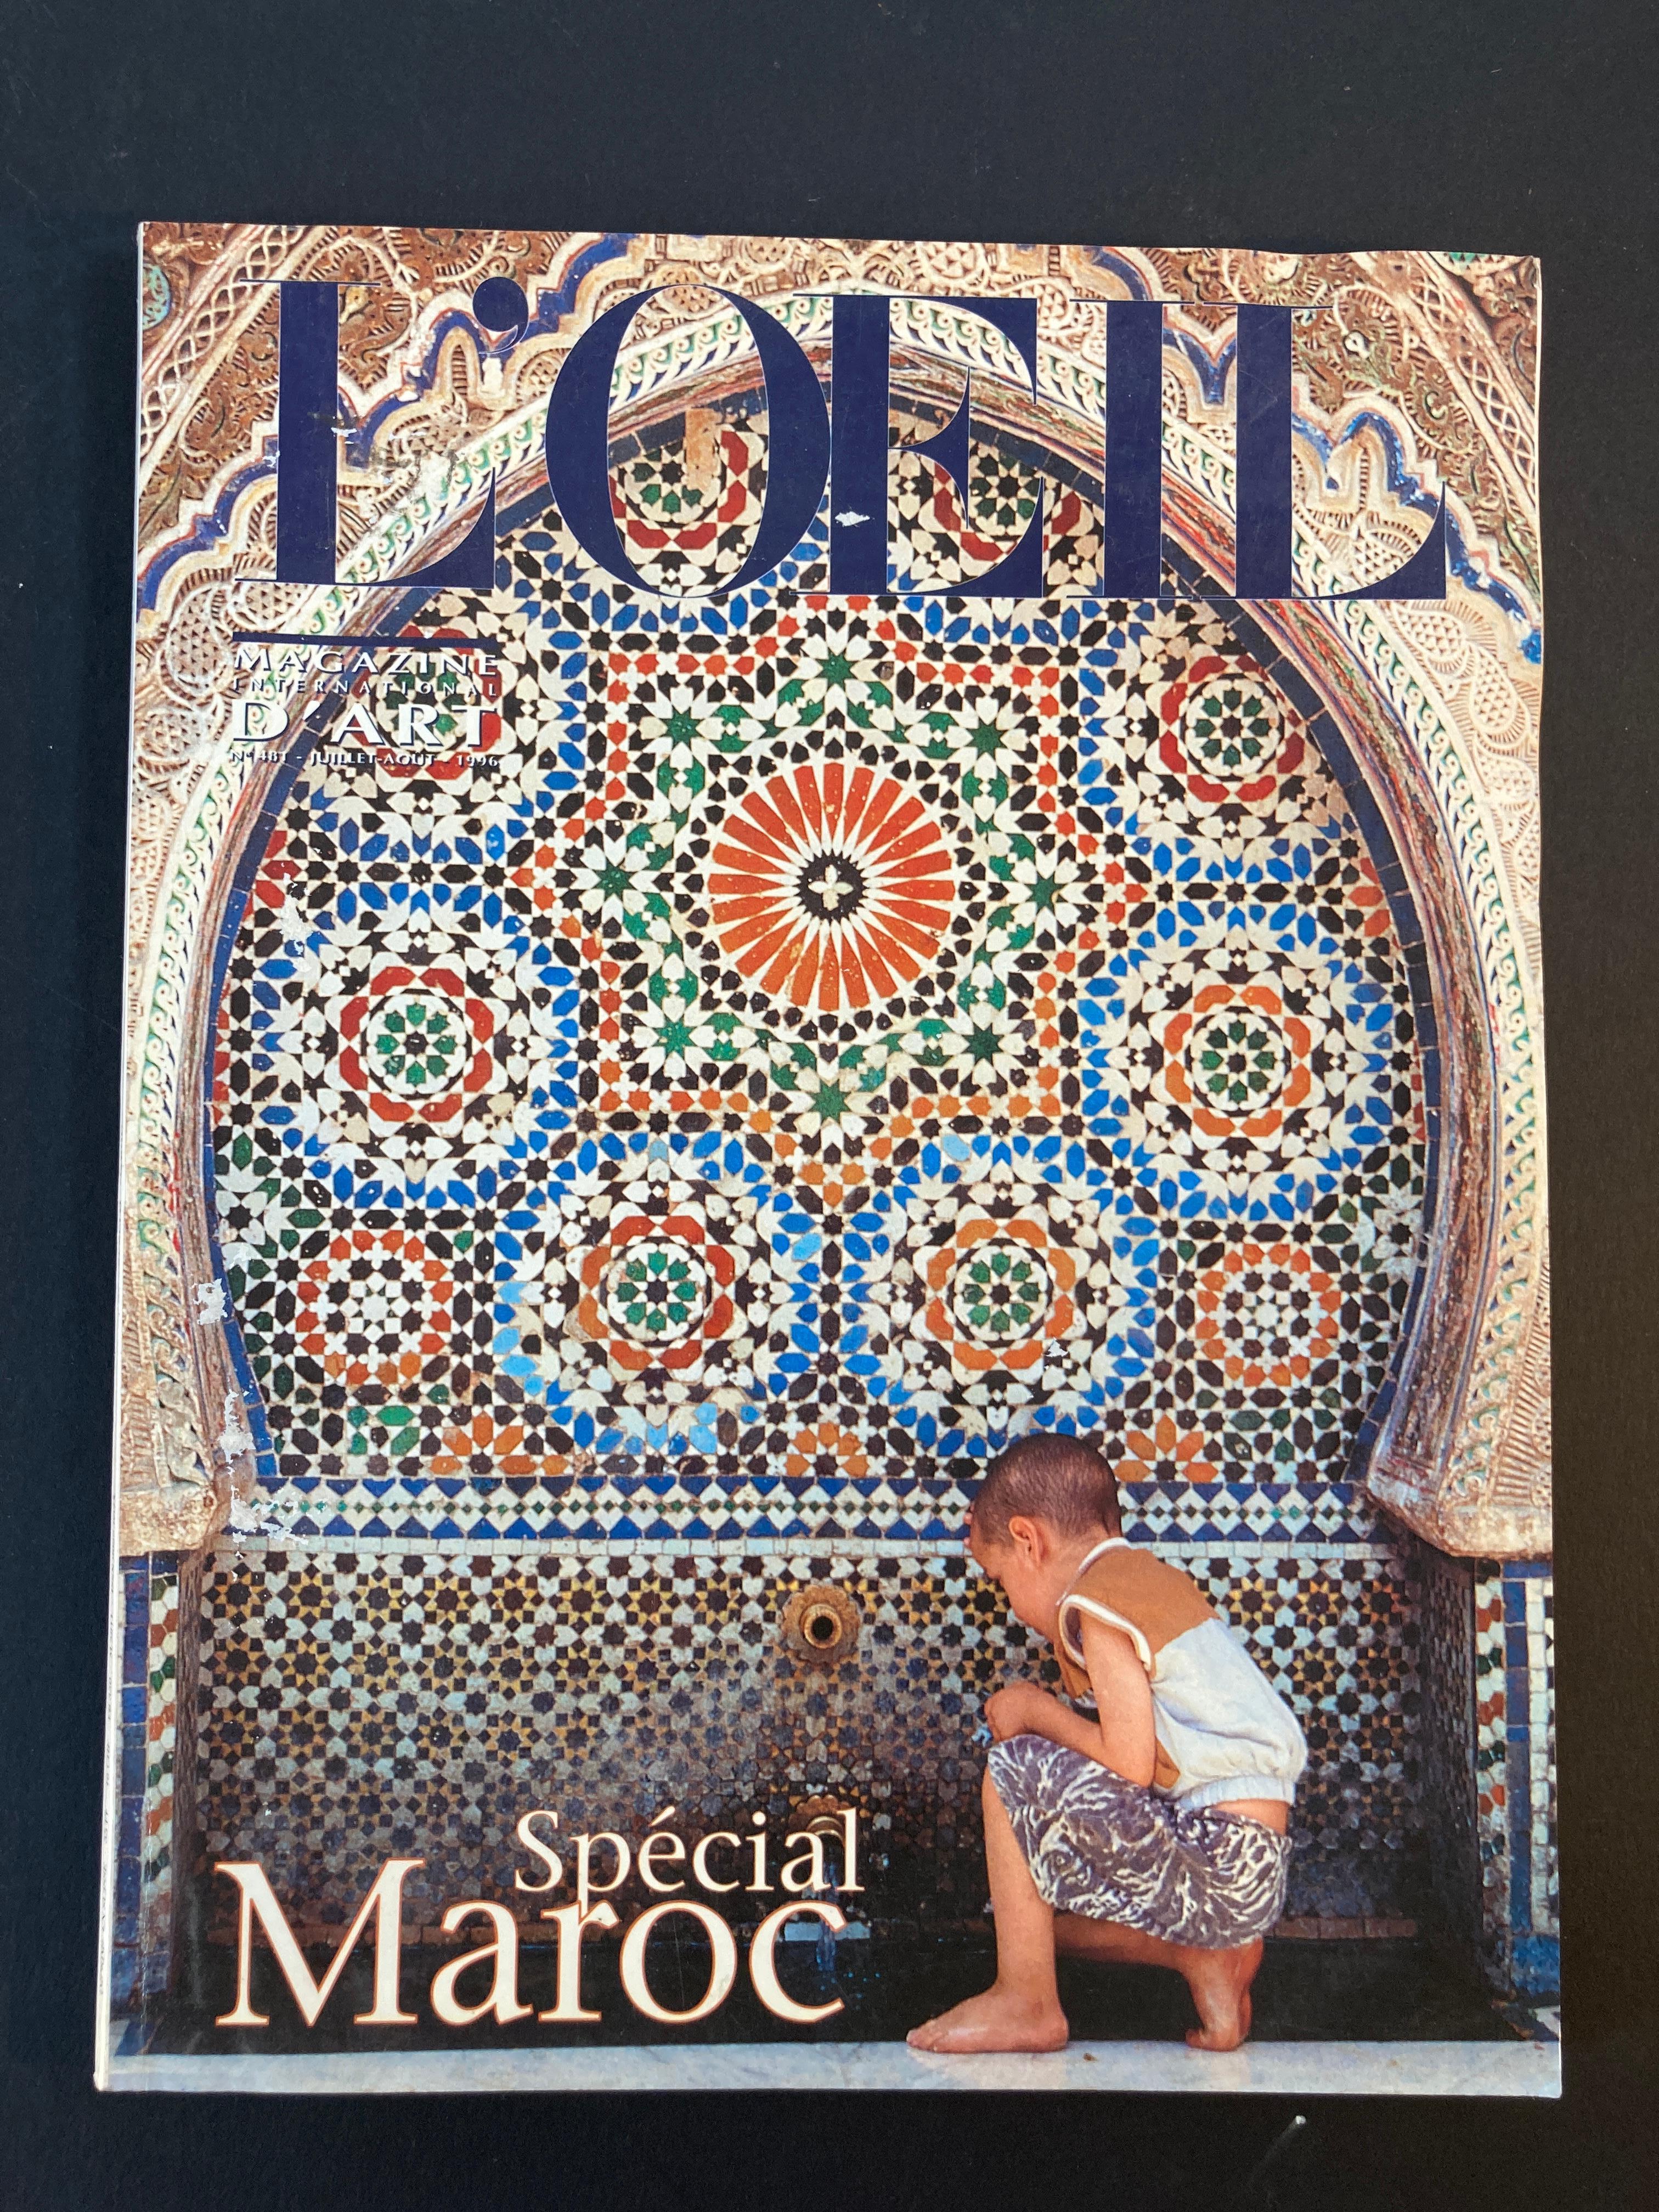 L'oeil Magazine International d'art n° 481 : Spécial Maroc 
The eye. International art magazine N ° 481: Special Morocco.  
Author: Collective 
Collection: The Eye. International art magazine 
Publication: 07/01/1996 
This is a beautiful large